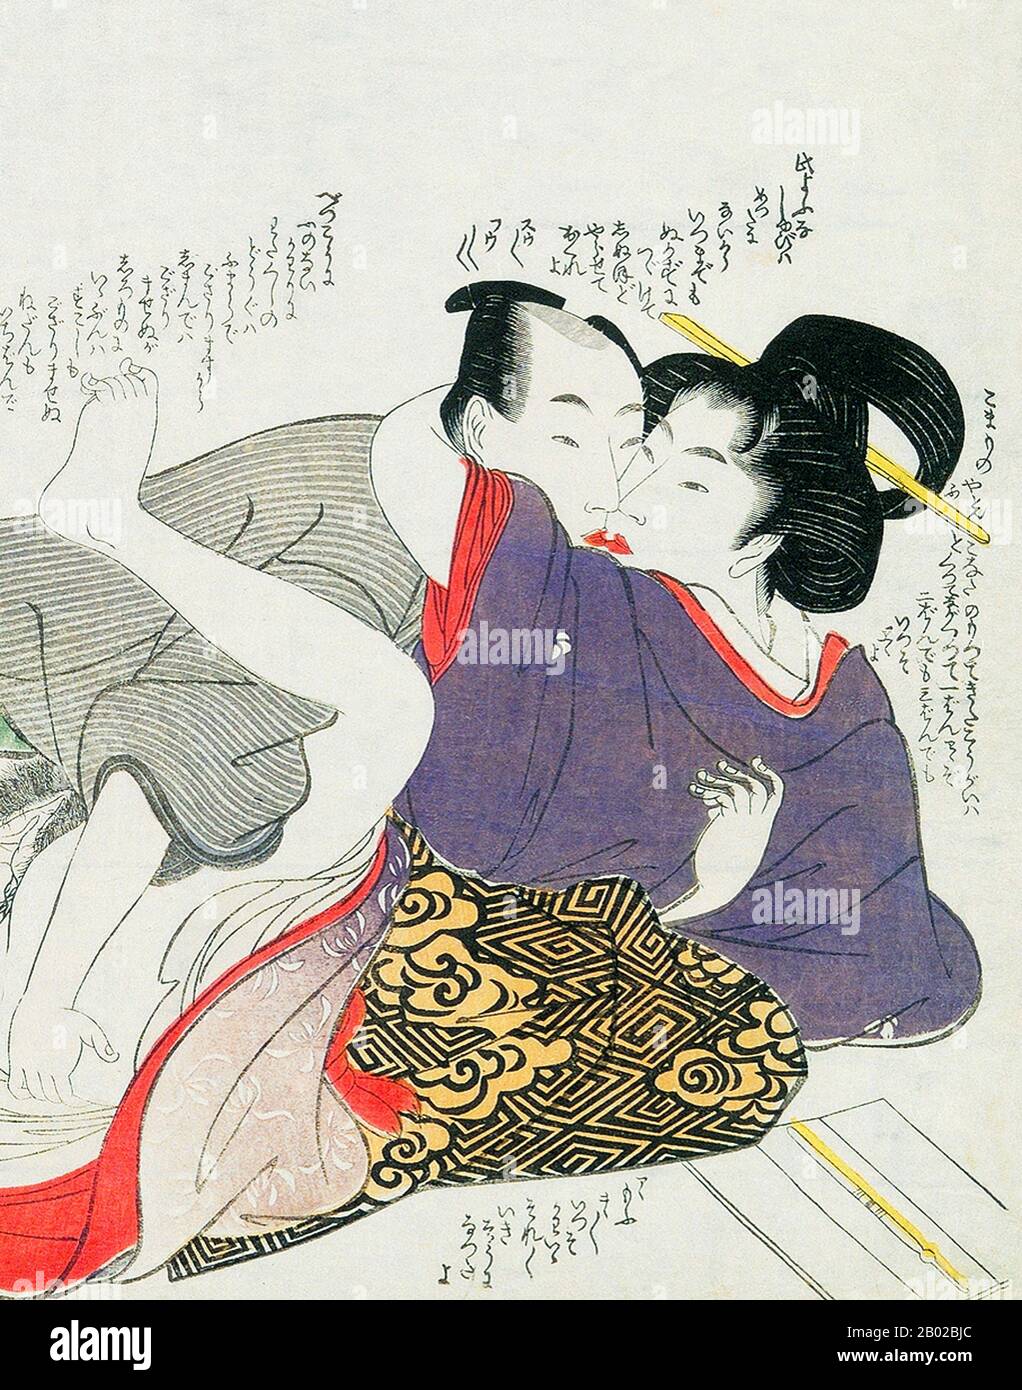 Kitagawa Utamaro (ca. 1753 - October 31, 1806) was a Japanese printmaker and painter, who is considered one of the greatest artists of woodblock prints (ukiyo-e). He is known especially for his masterfully composed studies of women, known as bijinga. He also produced nature studies, particularly illustrated books of insects. Stock Photo